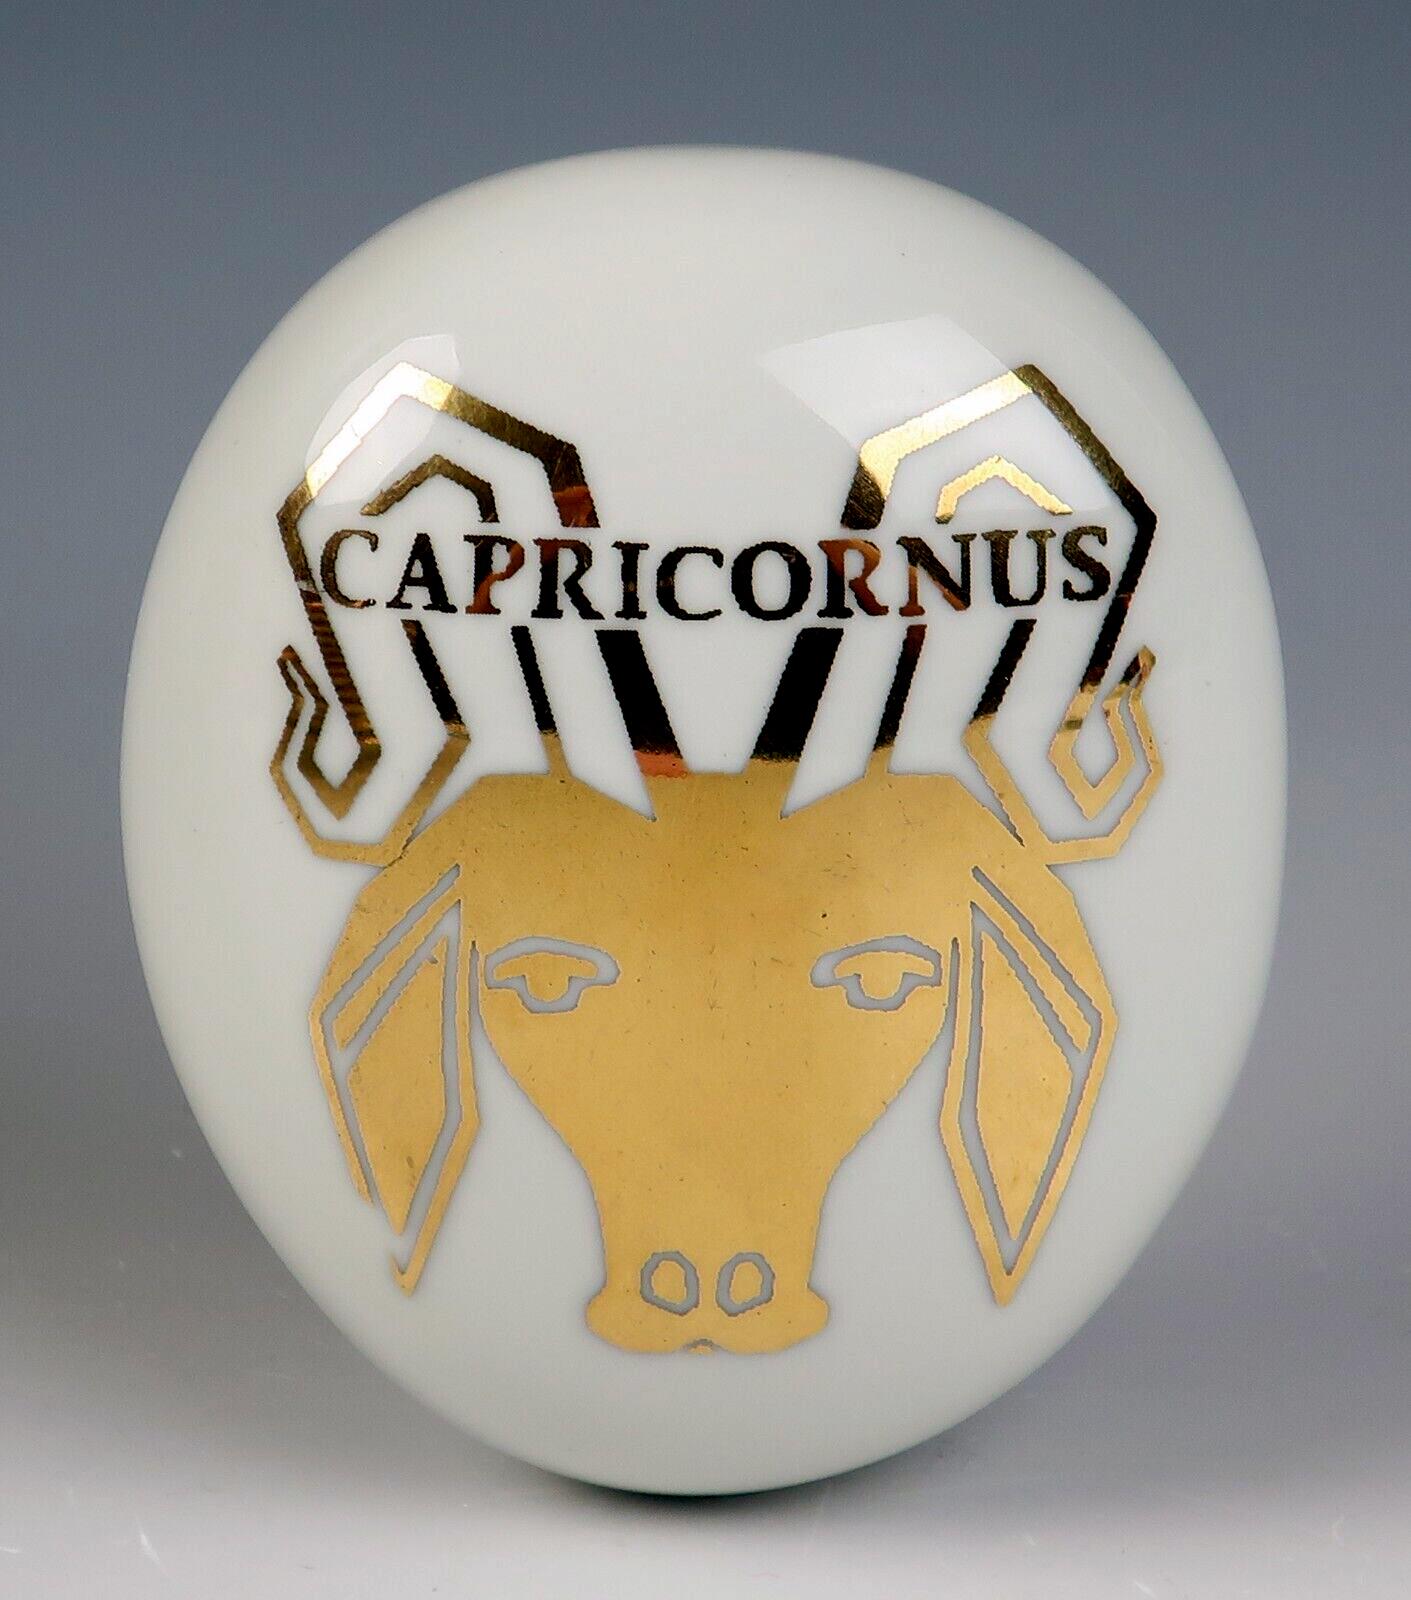 Piero Fornasetti Ceramic Pebble Capricorn Zodiac Paperweight,
Titled Capricornus for the Astrological Sign Capricorn,
Circa 1960 

The oval ceramic paperweight is made in a form called pebble by Fornasetti.  The top depicts, in gold, a goat with the